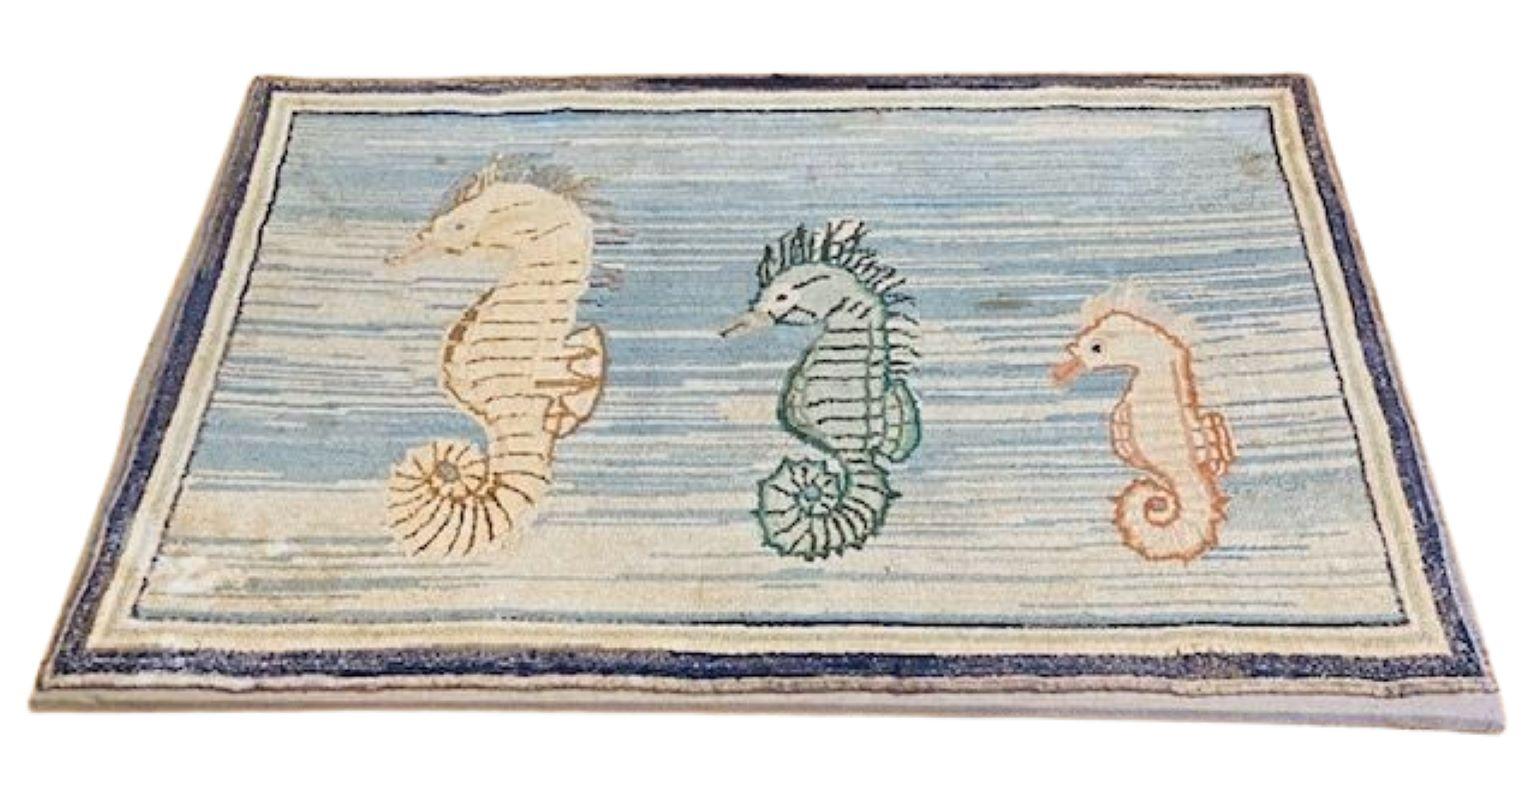 Vintage Folk Art Sea Horse Hooked Rug, circa 1960, featuring a family of three variously sized and colored sea horses swimming against a variegated blue and white ocean background, mounted on a linen covered wooden stretcher to be hung on a